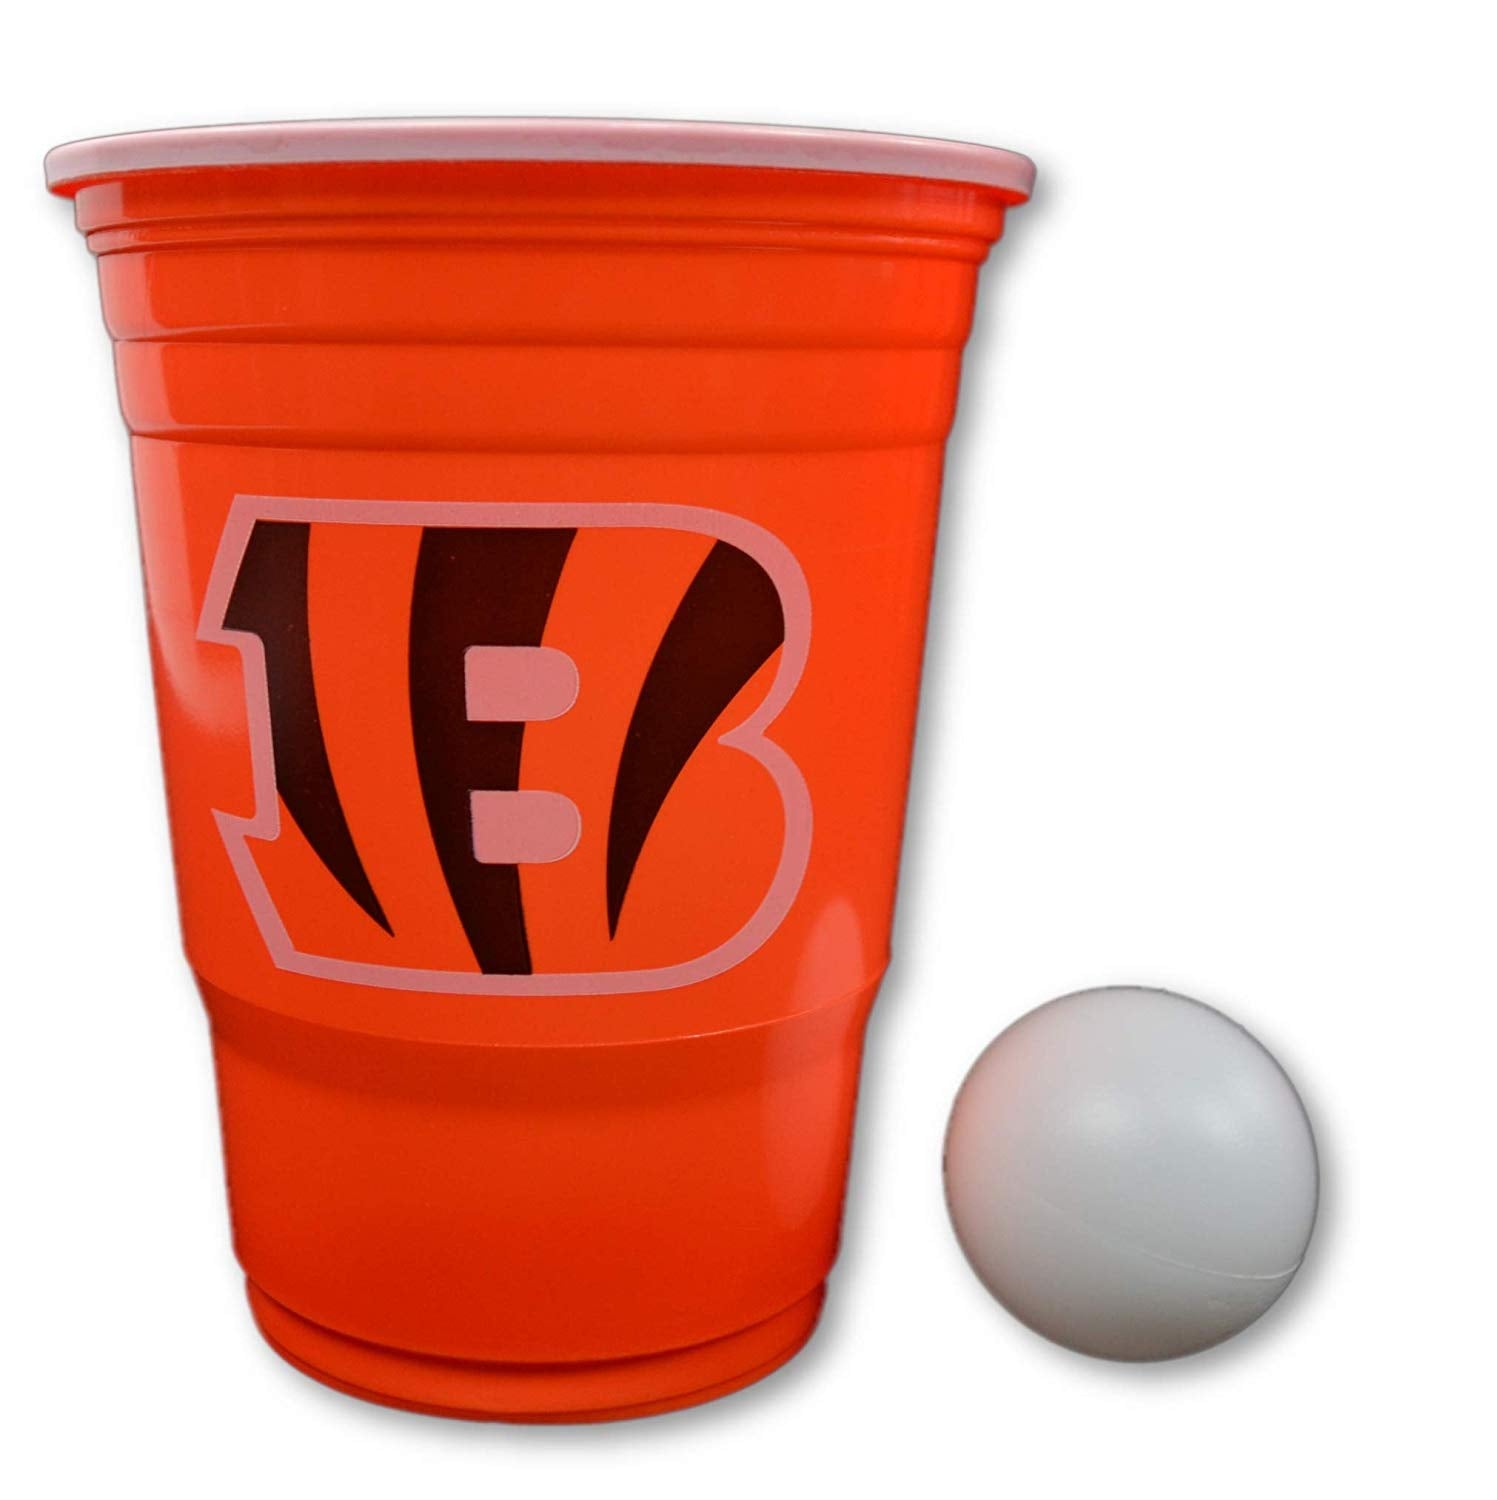 Siskiyou/Sport Mania NFL Fan Shop Beer Pong Set. Rep Your Favorite Team with The Classic Game of Beer Pong at Home or at The Tailgate Party - Comes with 22 Cups and 6 Ping Pong Balls